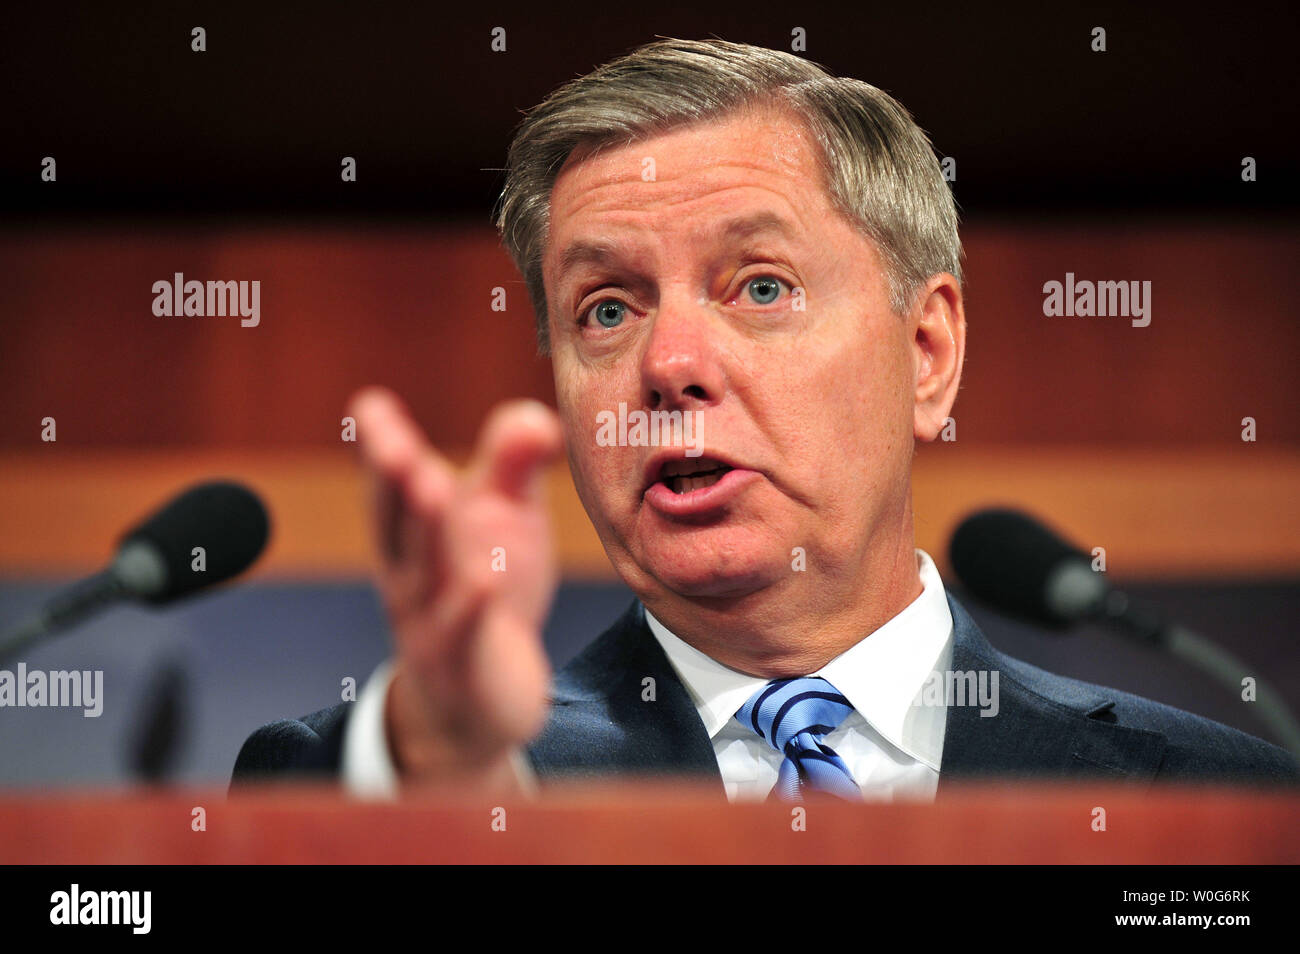 Sen. Lindsey Graham (R-SC) speaks at a news conference on legislation to repeal and replace the health care law by allowing states to 'Opt-Out' of its major provisions, on Capitol Hill in Washington on February 1, 2011.  UPI/Kevin Dietsch.. Stock Photo